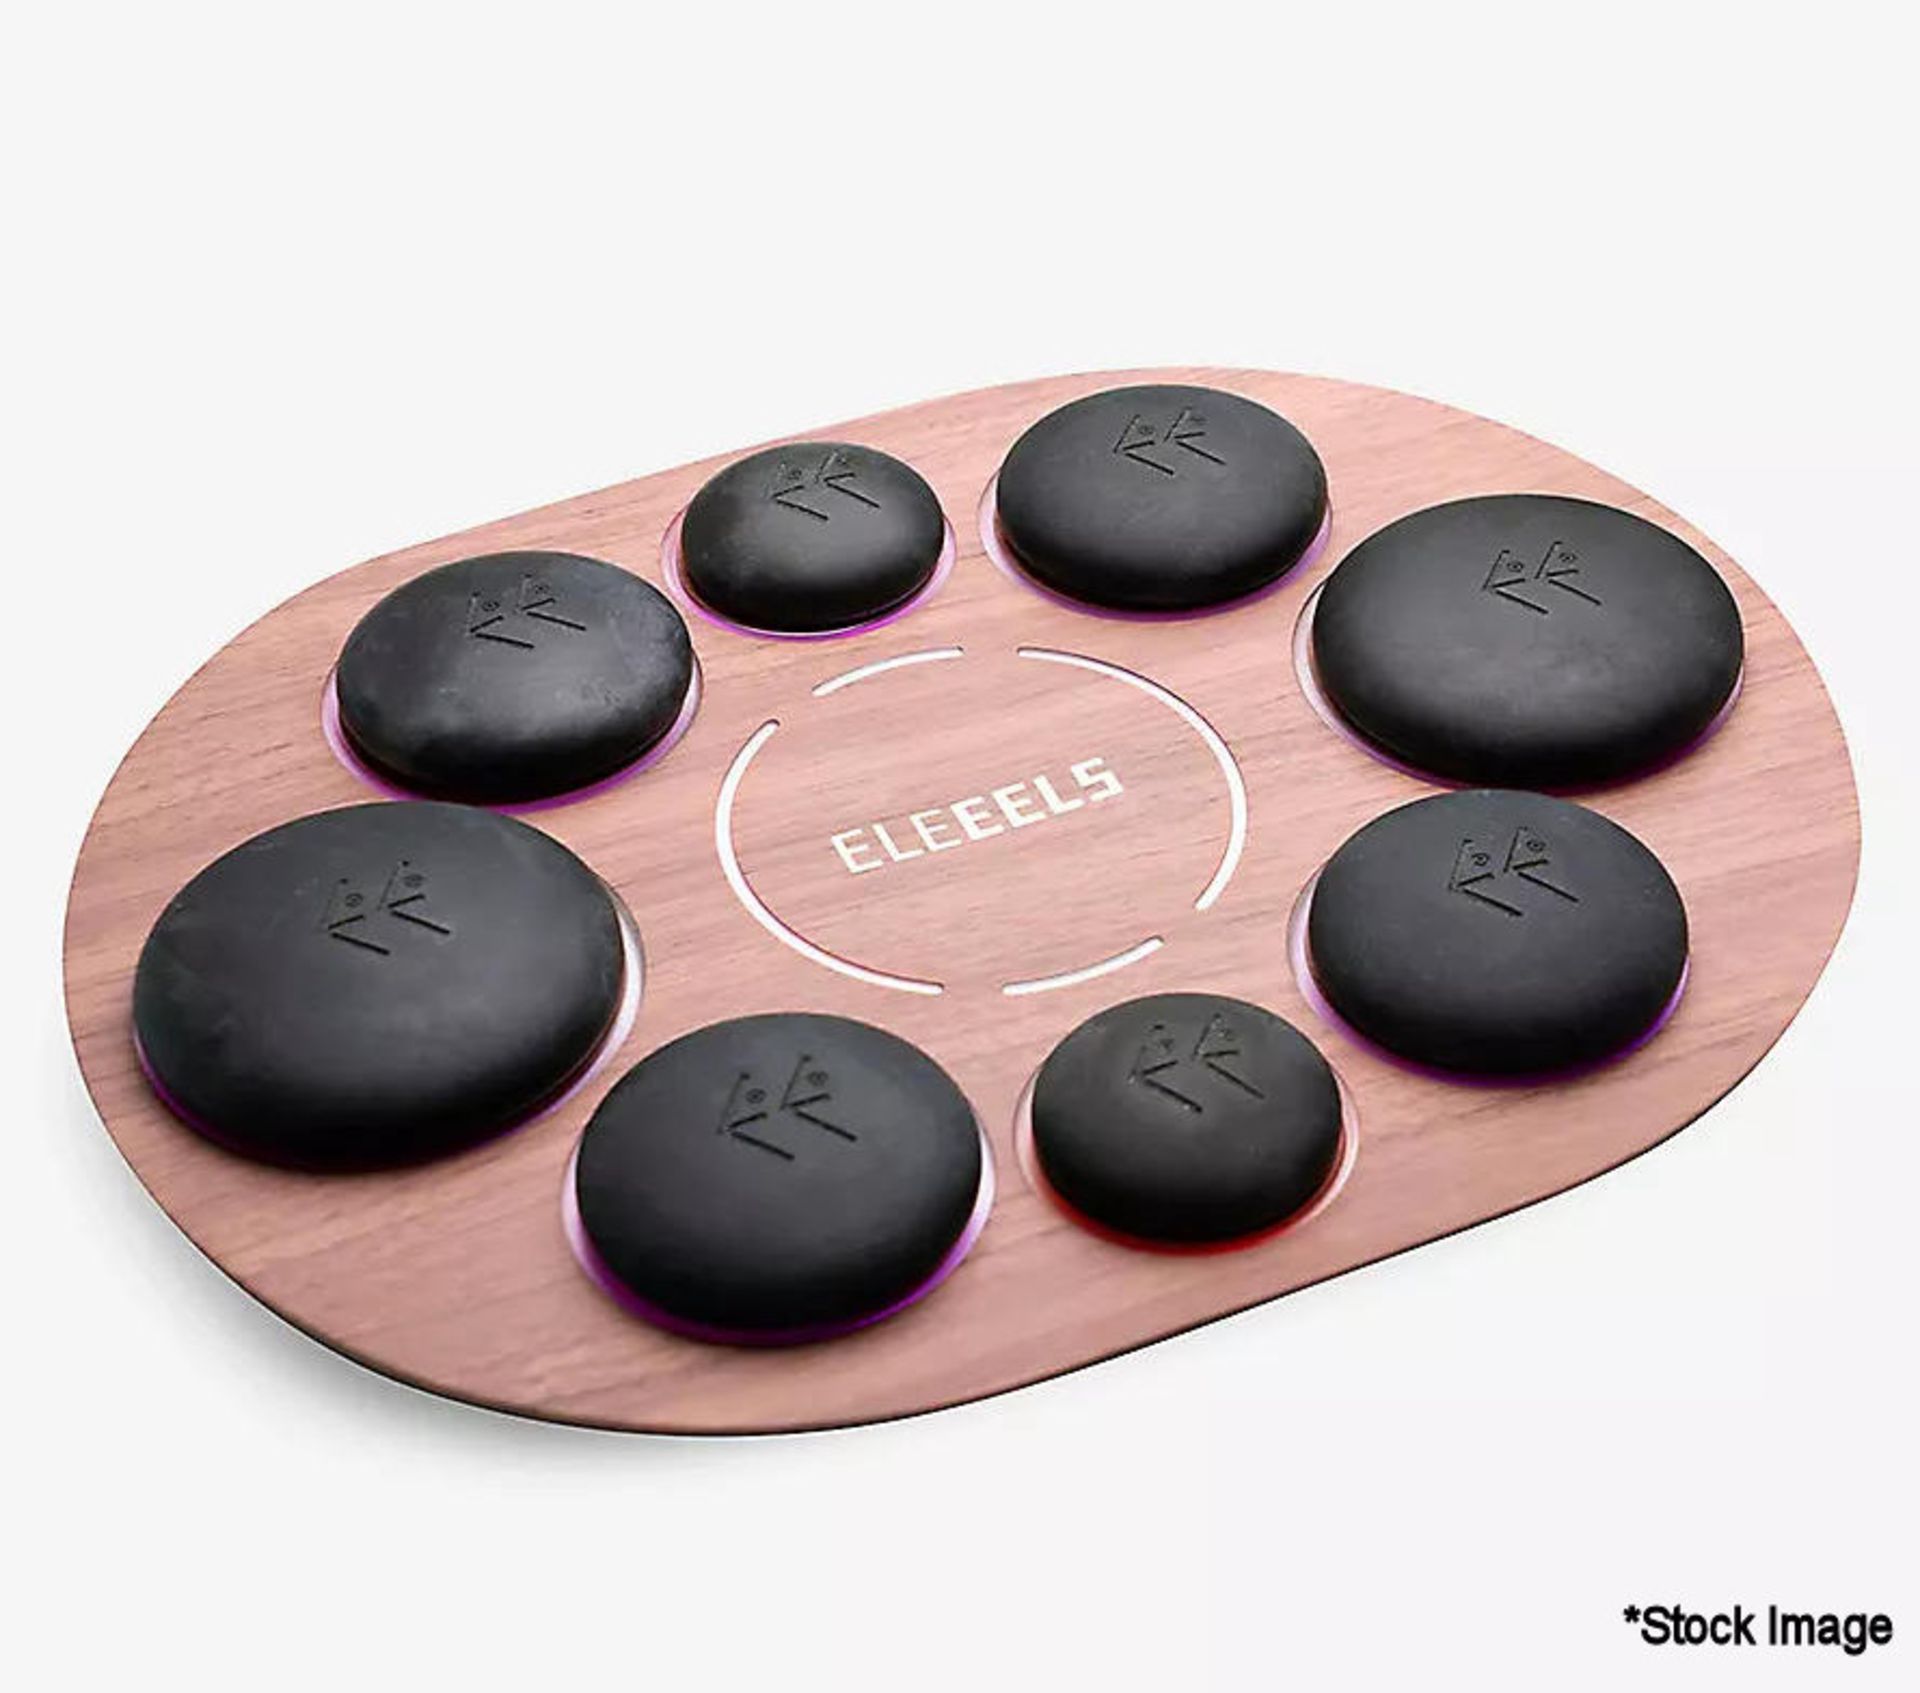 1 x ELEEELS Eleeels S1 Revival Hot Stone Spa Collection - New/Boxed - Original RRP £349 - Ref: